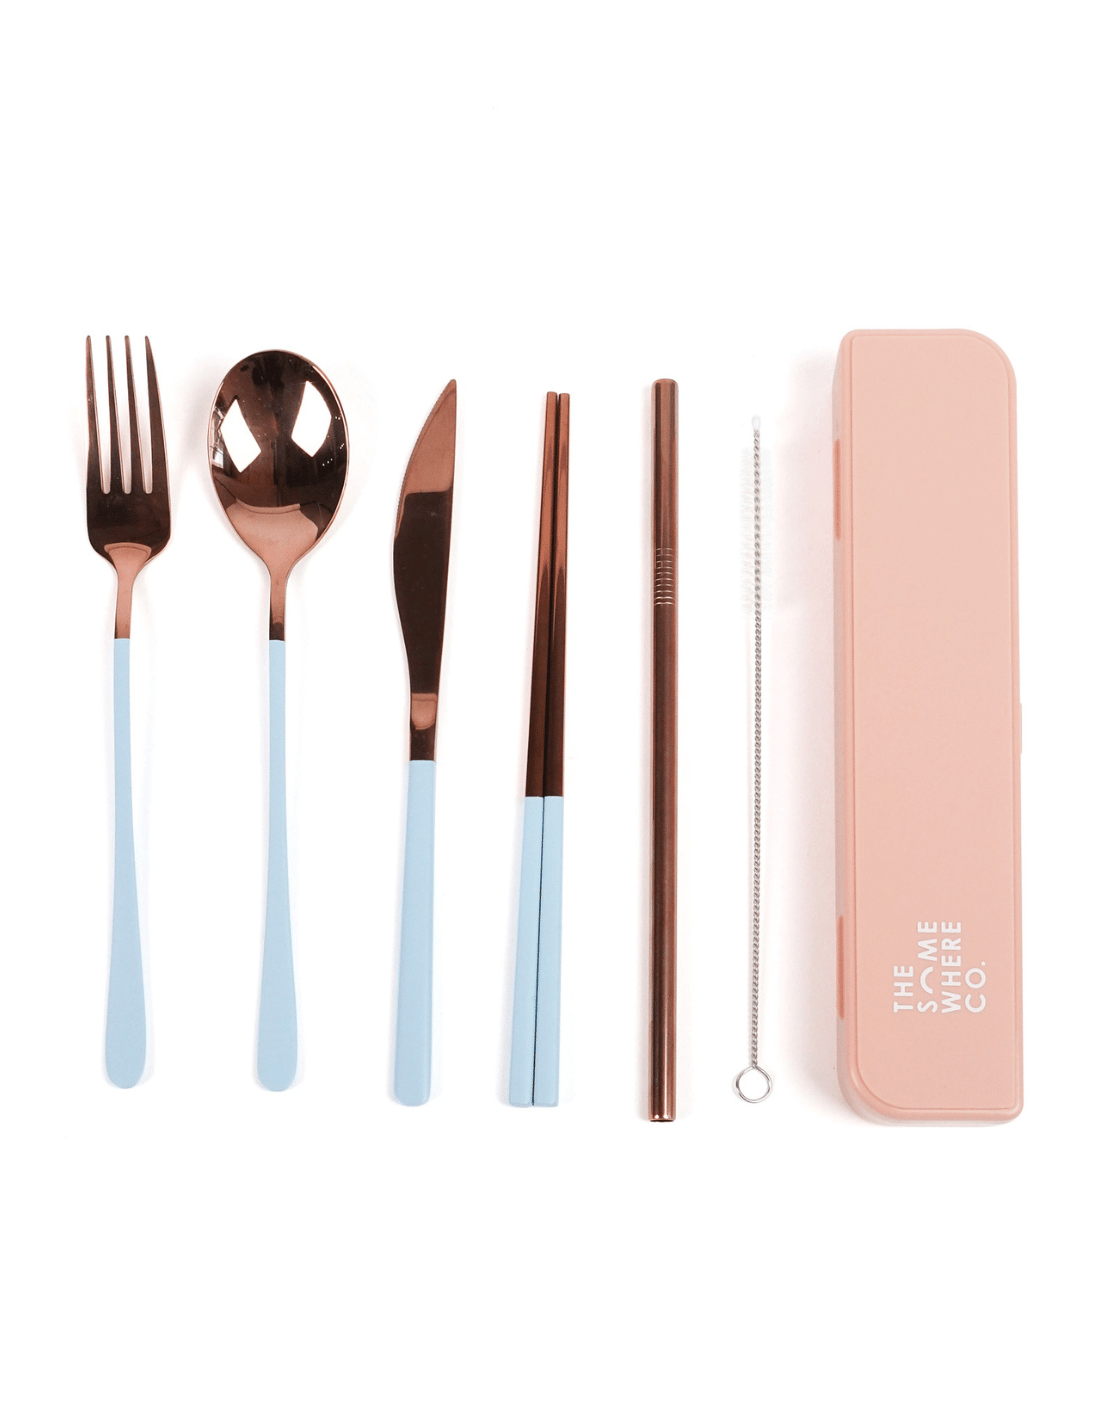 Cutlery Kit - Rose Gold with Powder Blue Handle (PRE-ORDER)